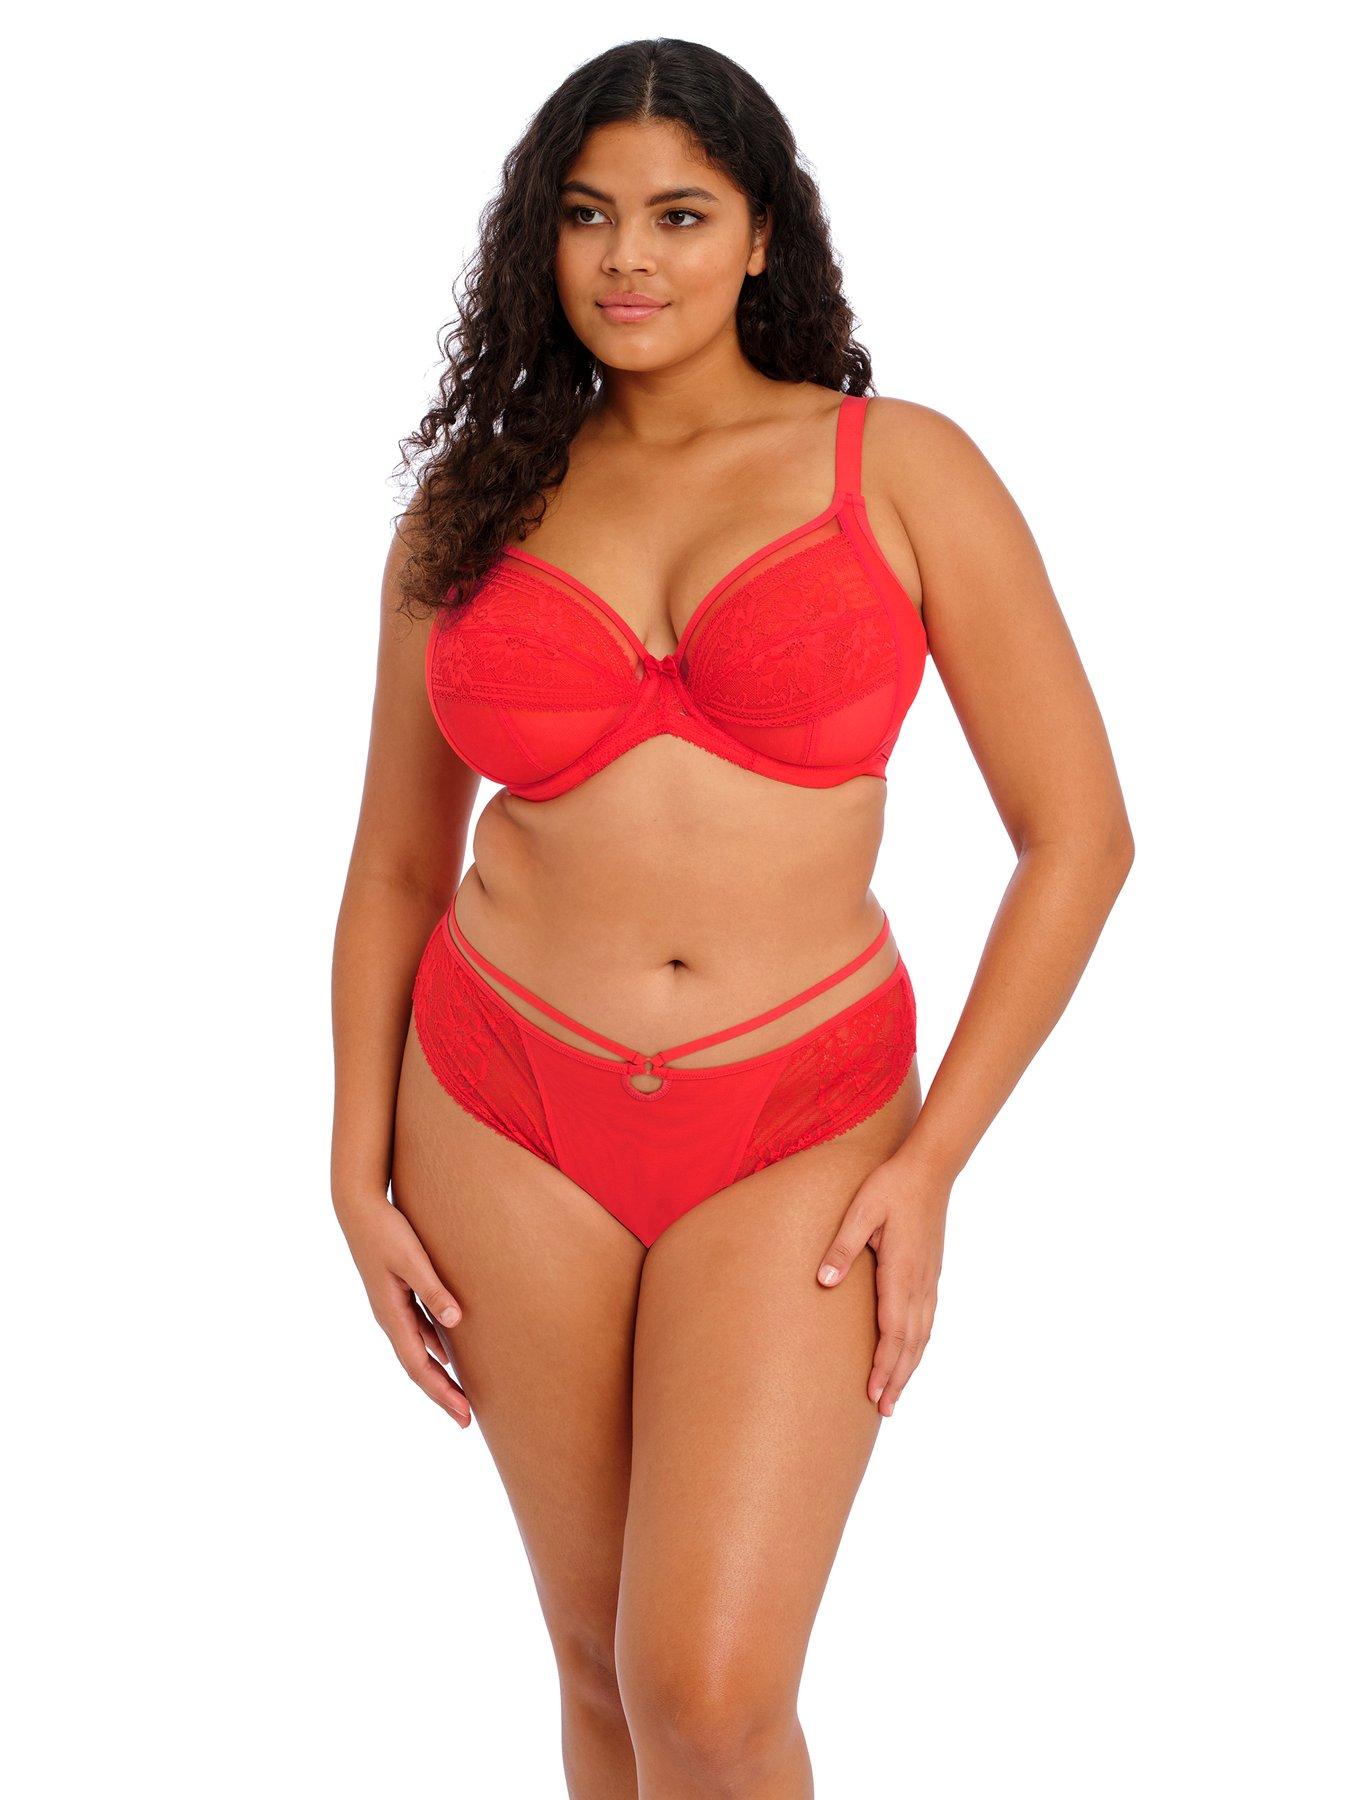 Track Smoothing Intimates Unlined Full Coverage Bra - Sienna - 38 - G